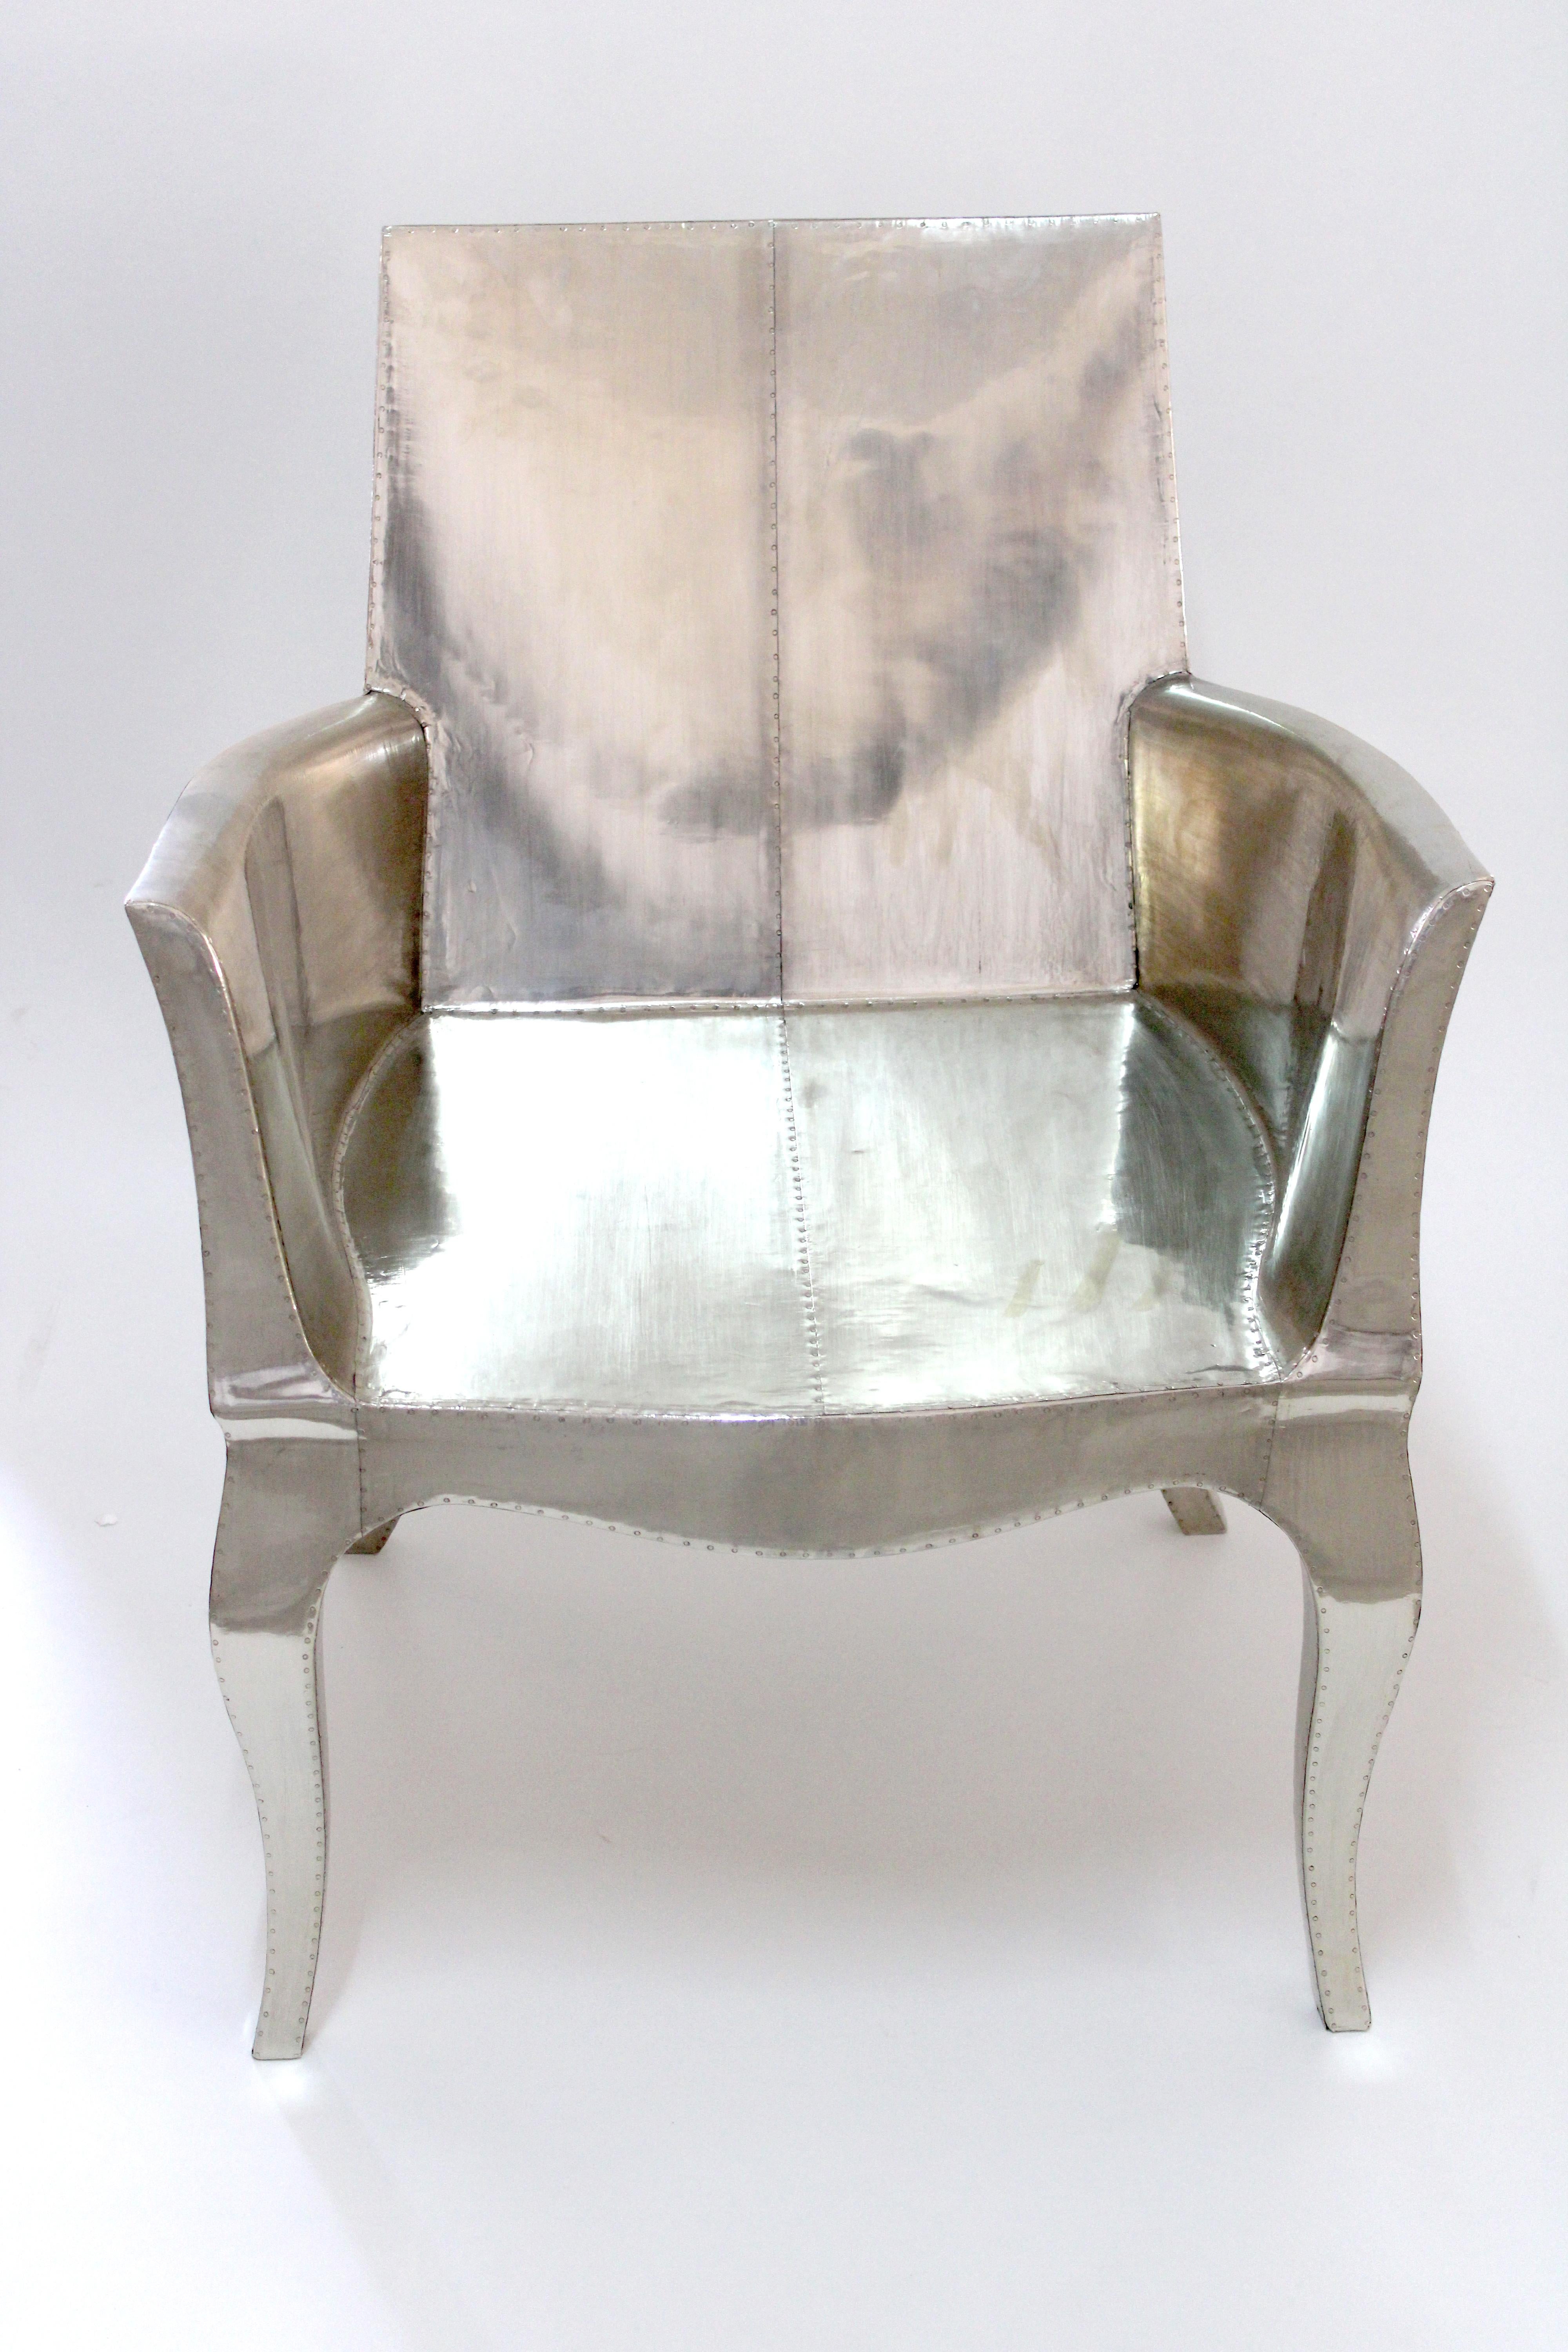 Art Nouveau Dining Chairs in Smooth White by Paul Mathieu for S. Odegard For Sale 1